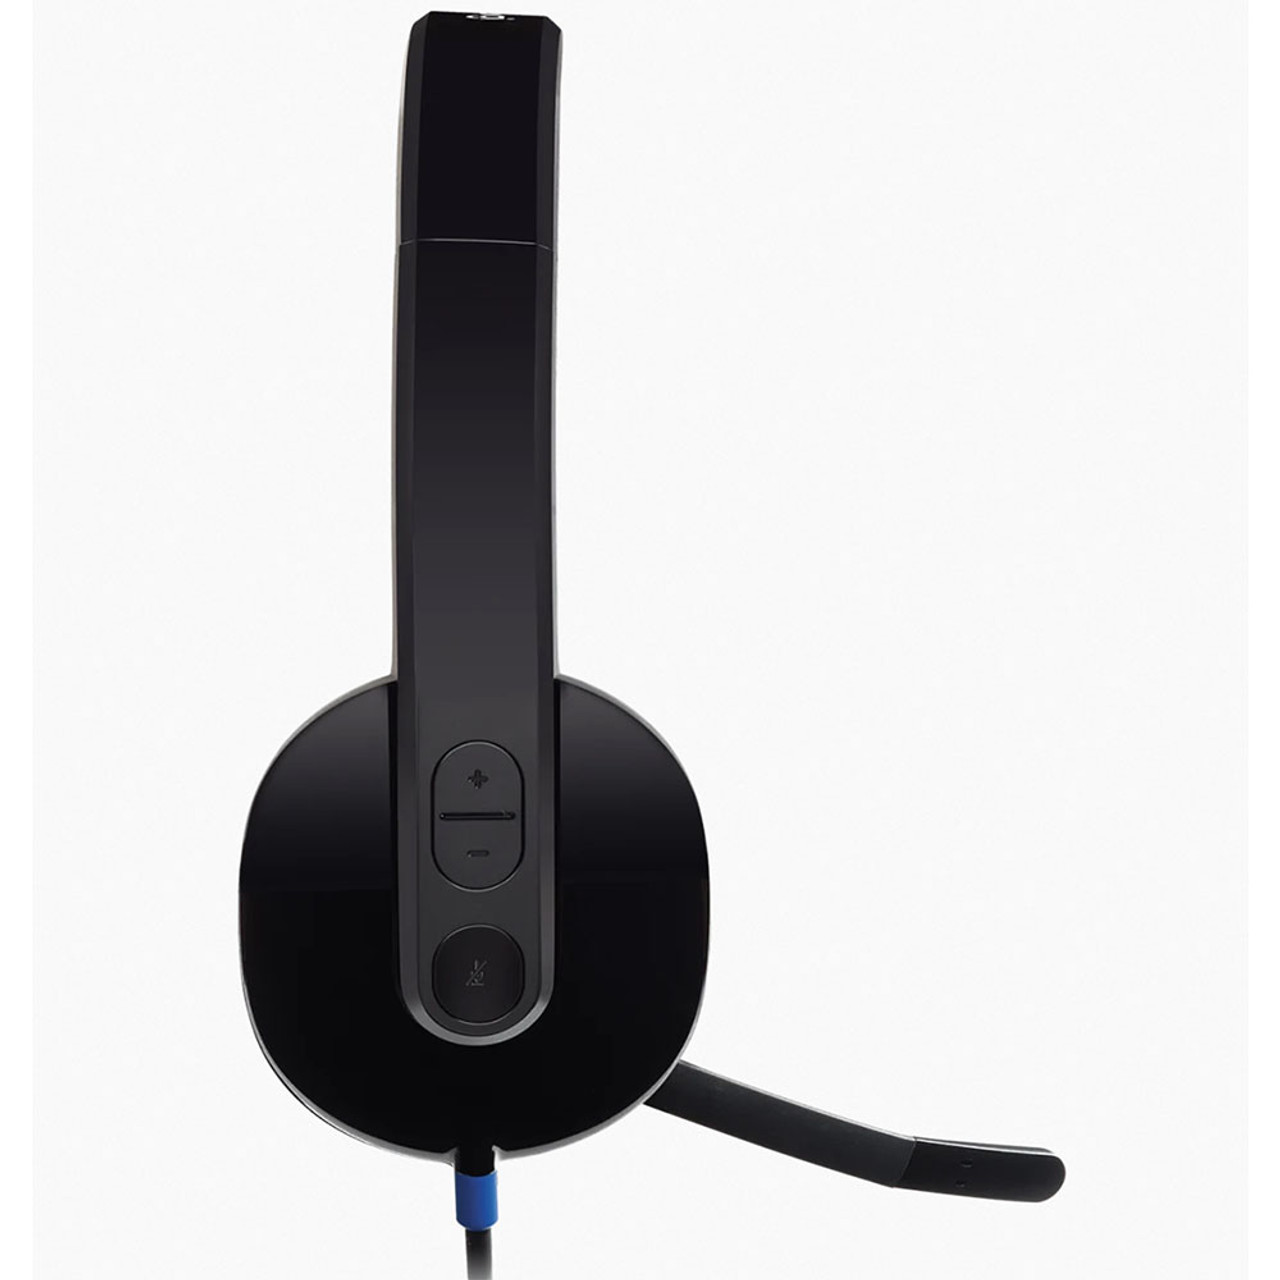 Logitech® High-Performance USB Headset H540 for PC product image